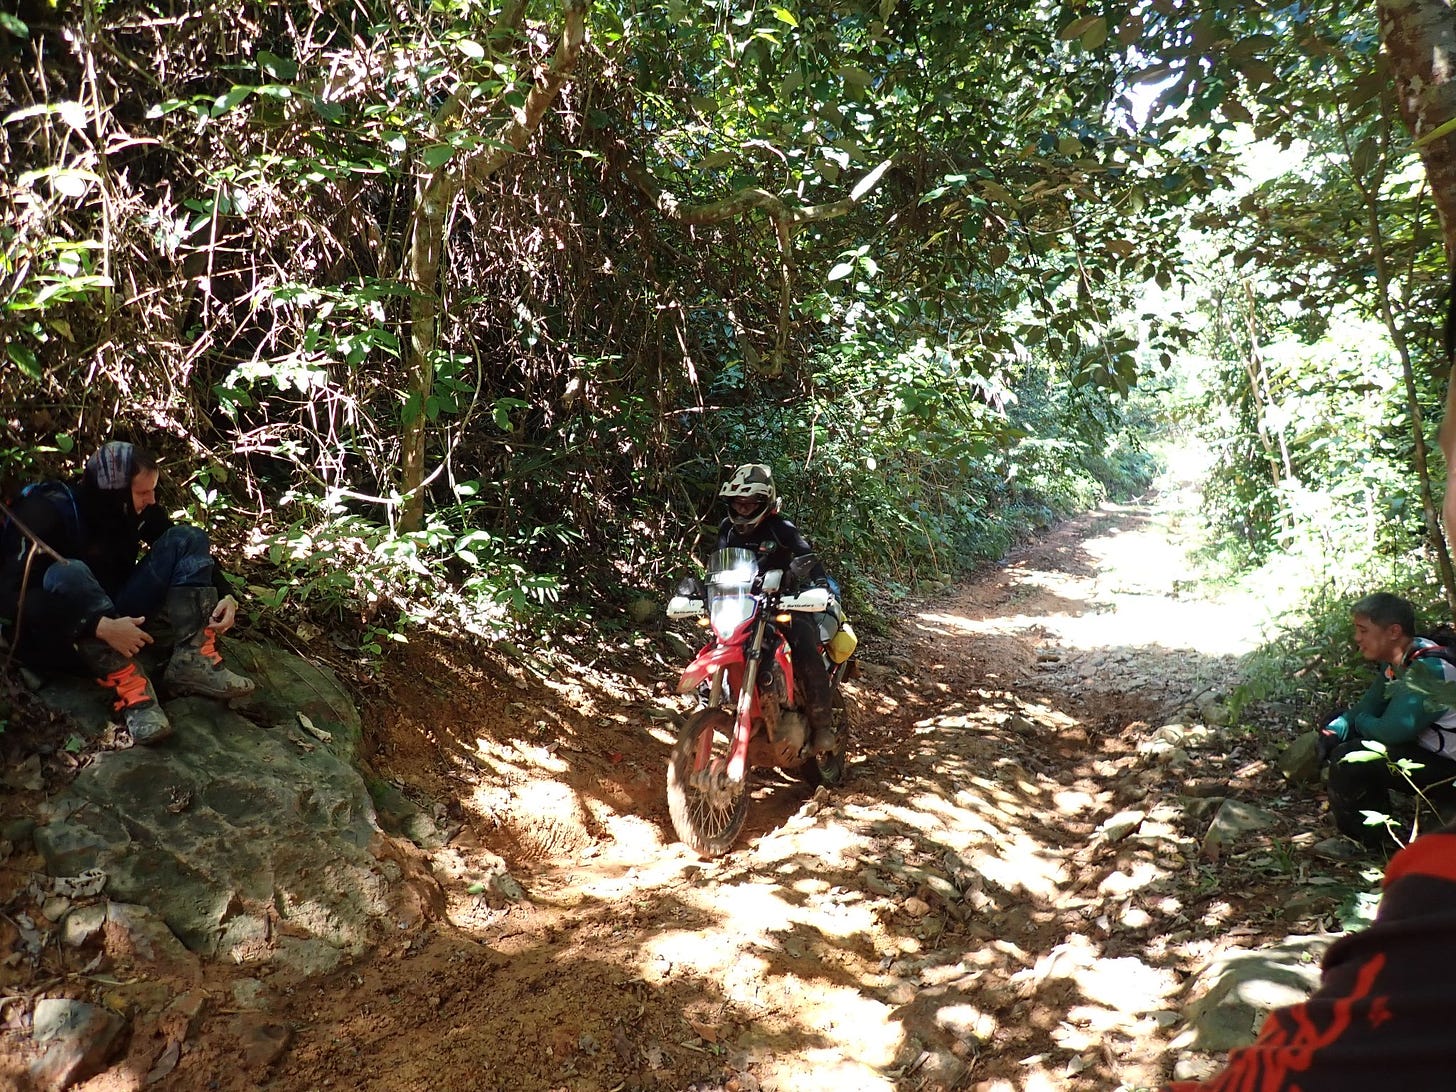 May be an image of 3 people, dirt bike, motorcycle, nature and tree